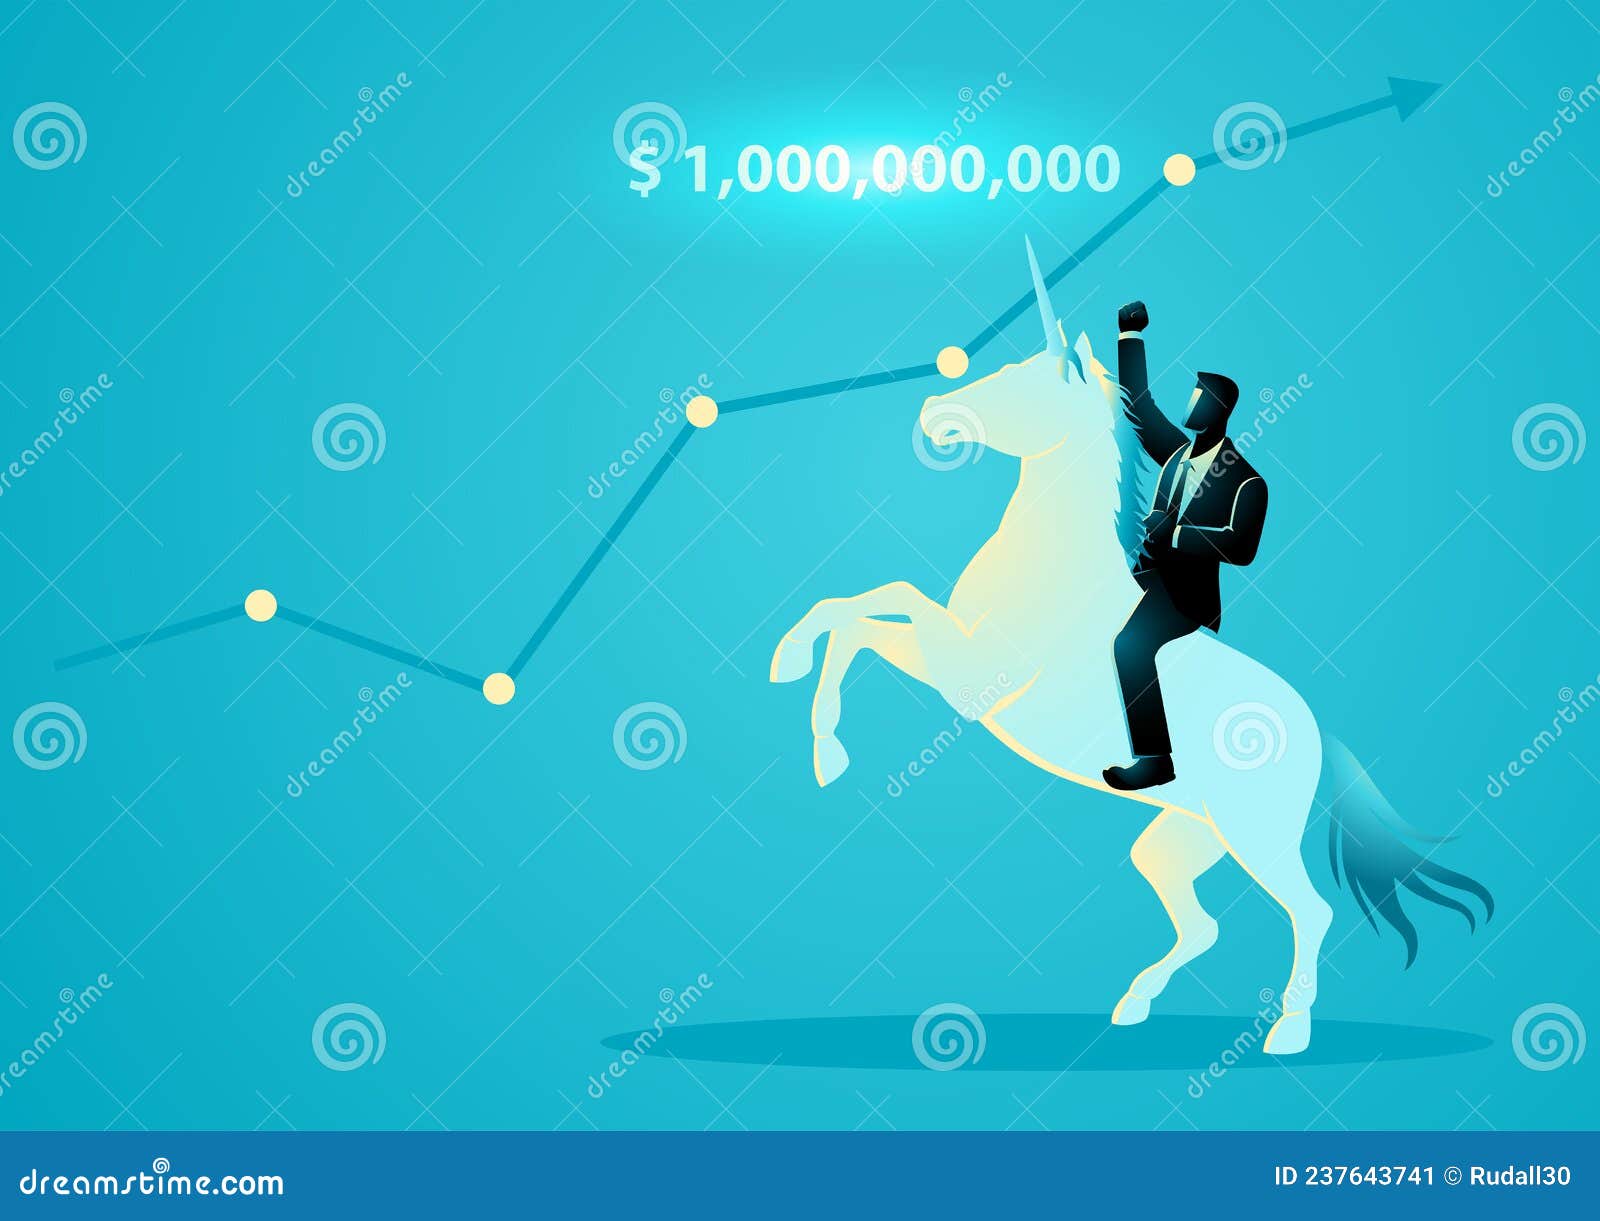 term unicorn is for company who have a valuation of more than 1 billion dollars